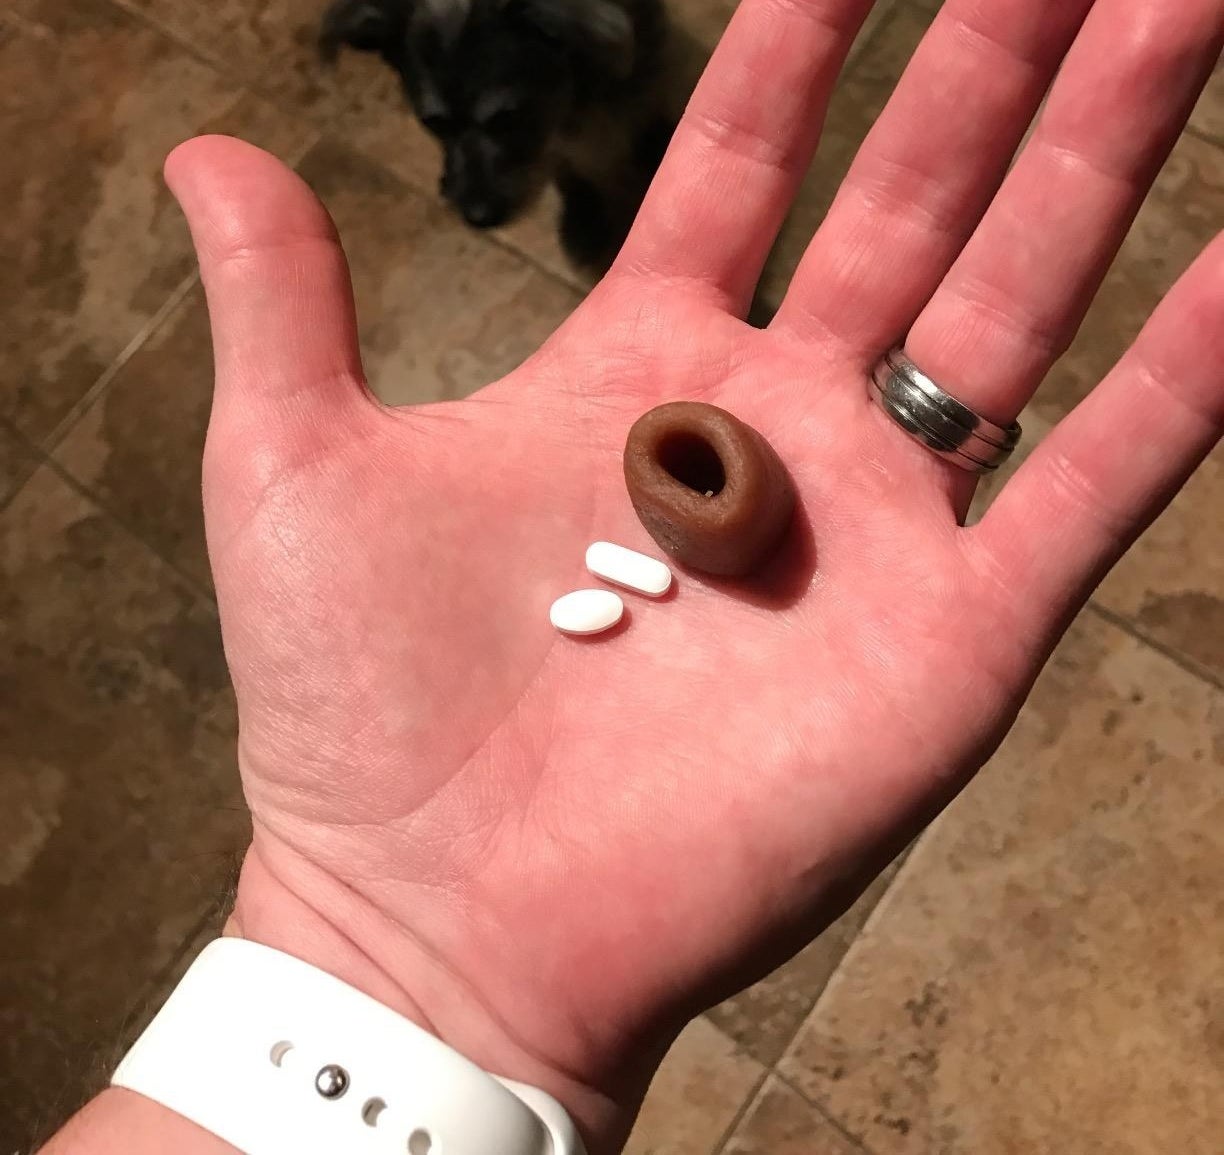 The treat held in an open palm, next to two pills